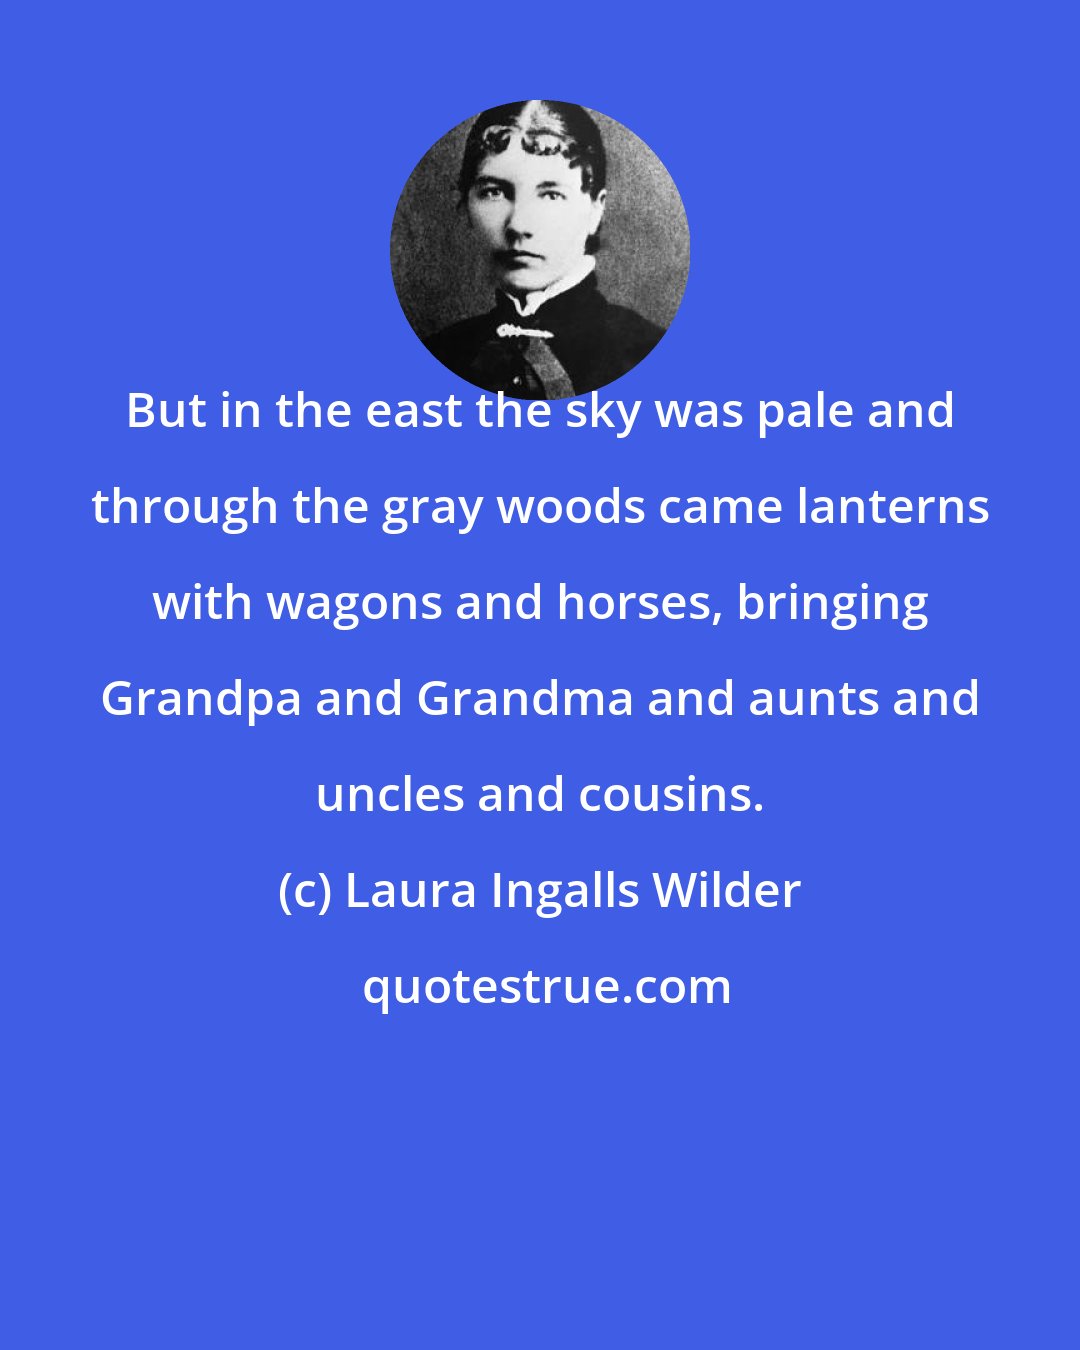 Laura Ingalls Wilder: But in the east the sky was pale and through the gray woods came lanterns with wagons and horses, bringing Grandpa and Grandma and aunts and uncles and cousins.